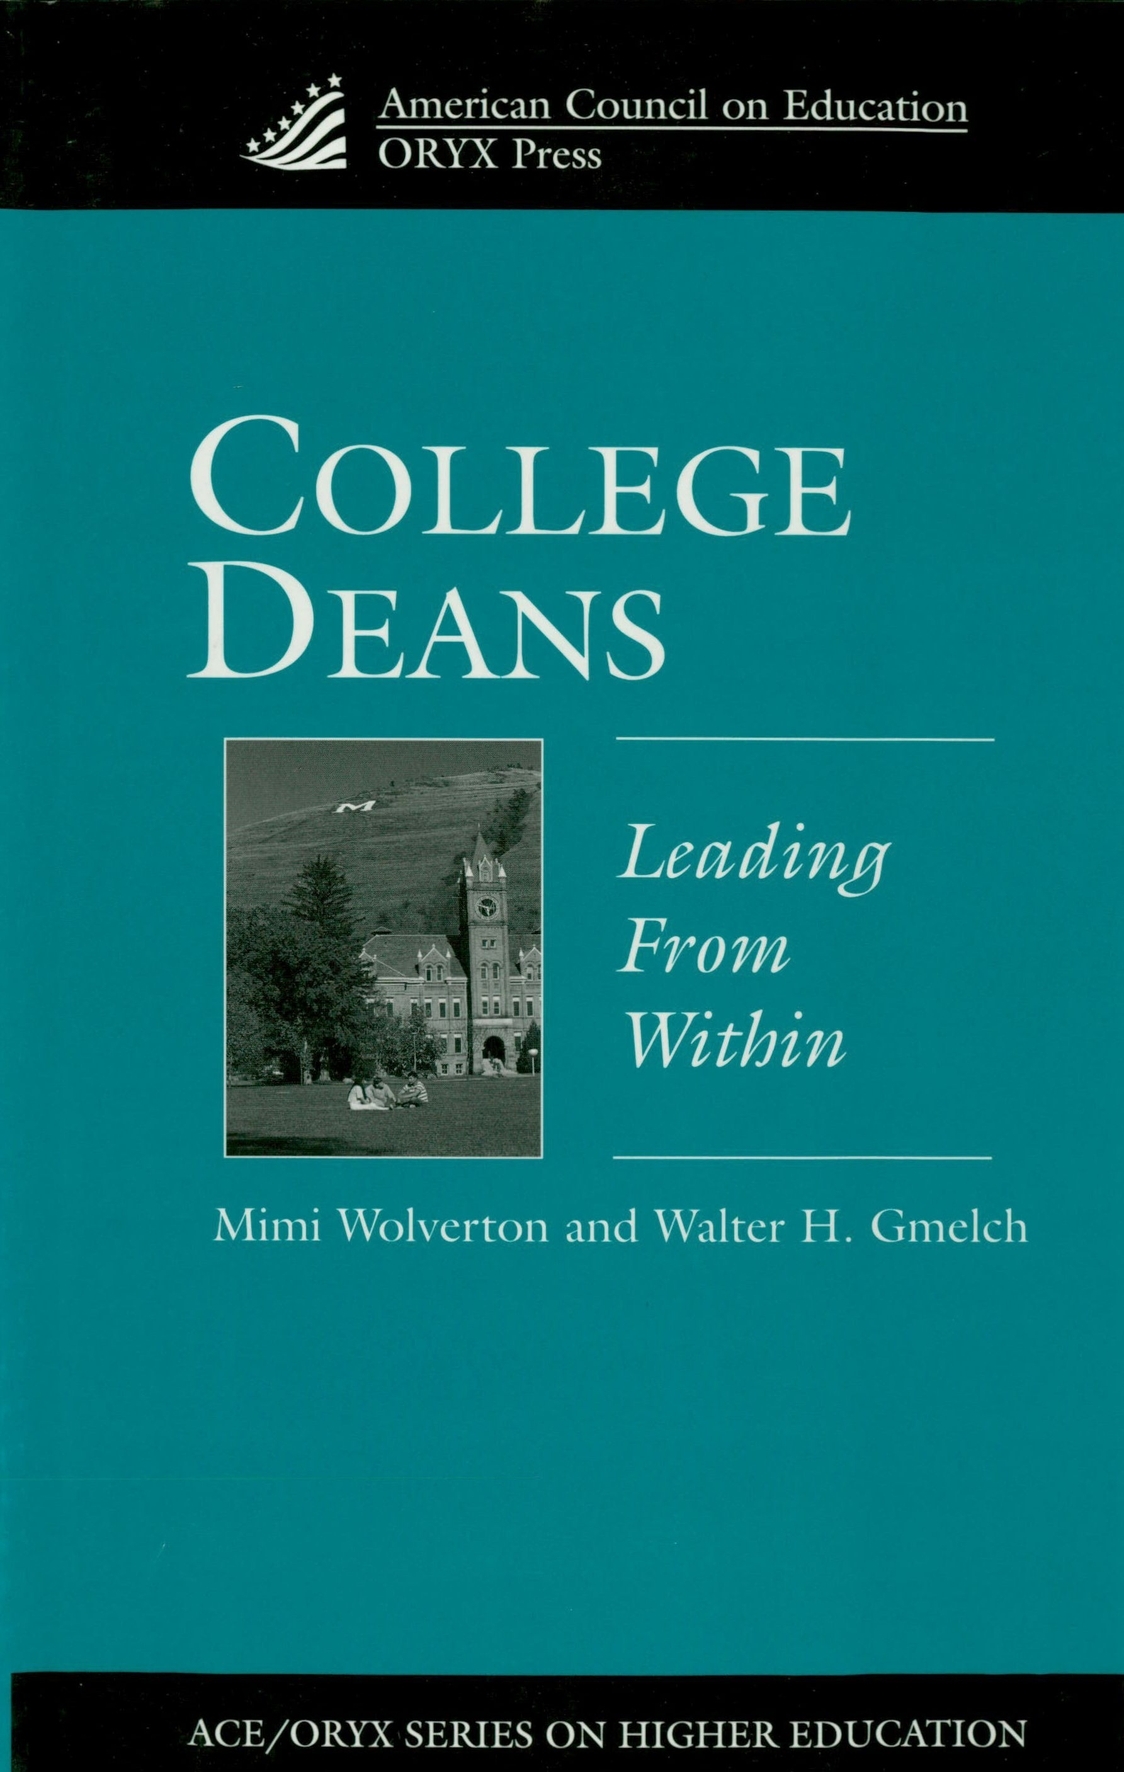 College Deans: Leading from Within